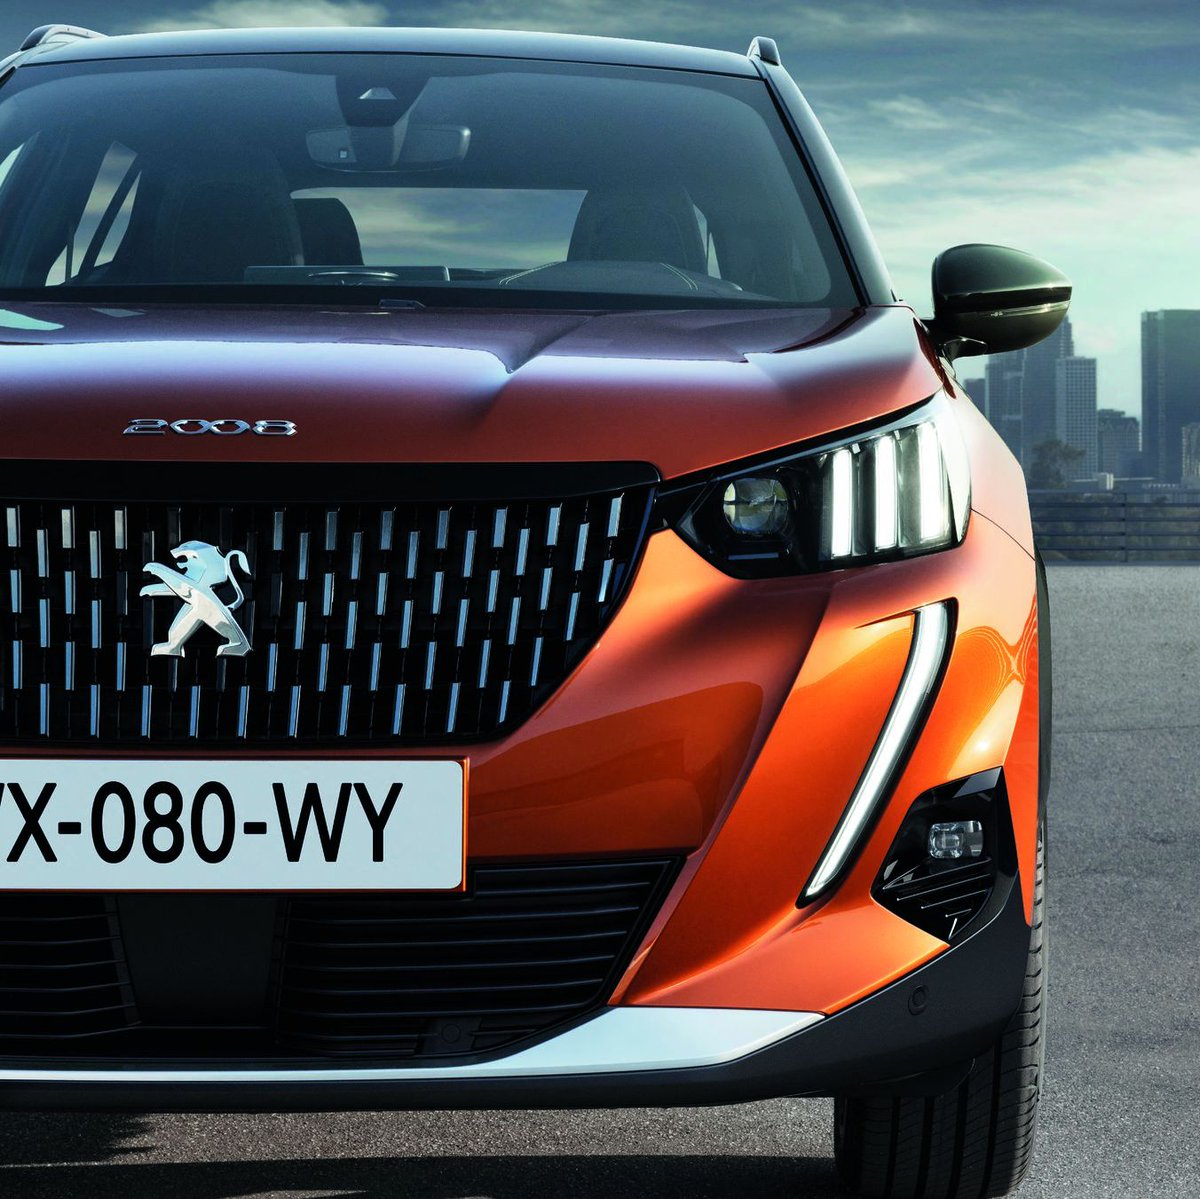 Stellantis &You UK on Twitter: "EXCELLENCE IN EVERY DETAIL. The all-new Peugeot 2008 SUV features a large chrome grille and presents a modern and bold vision with its signature full LED